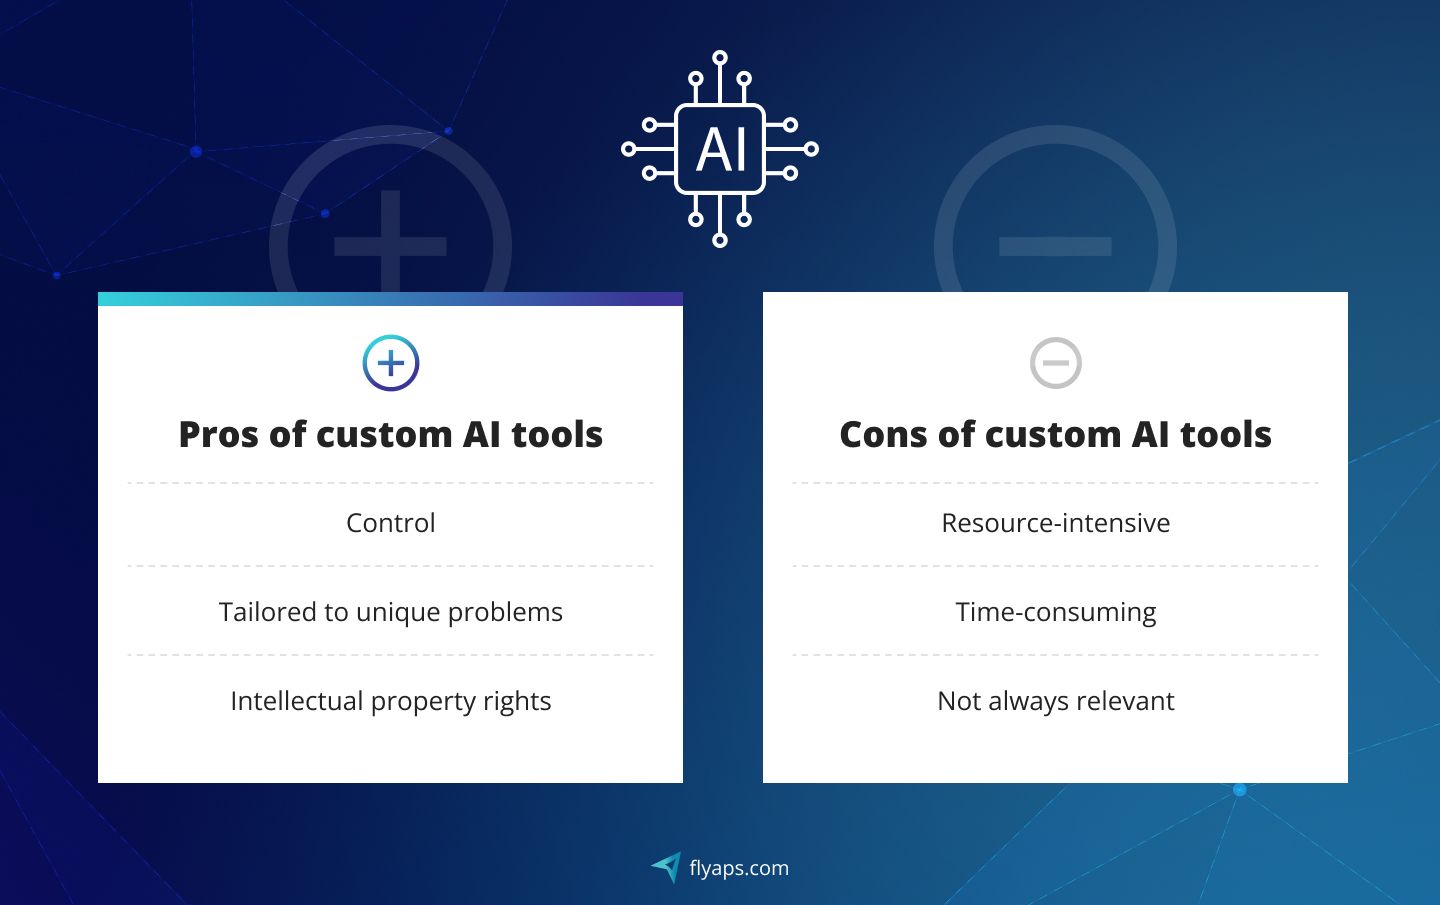 Pros and cons of custom AI tools